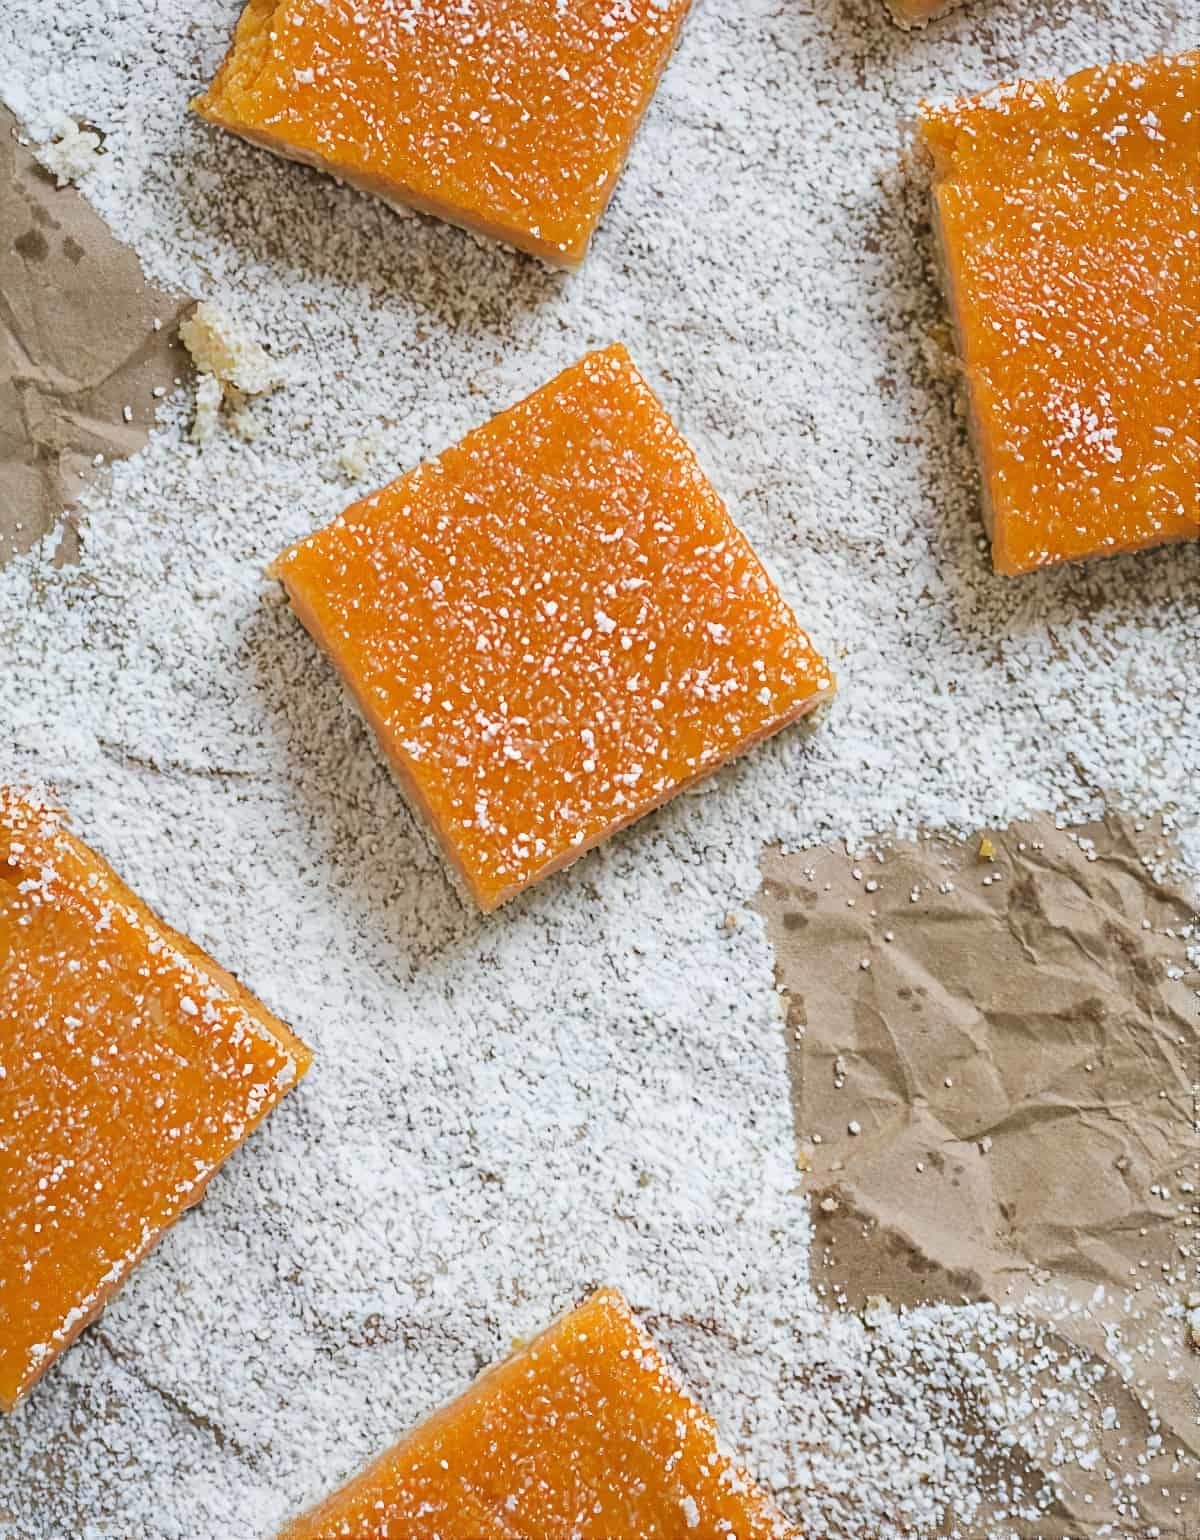 Square-shaped papaya bars dusted with powdered sugar on a flecked surface with parchment paper